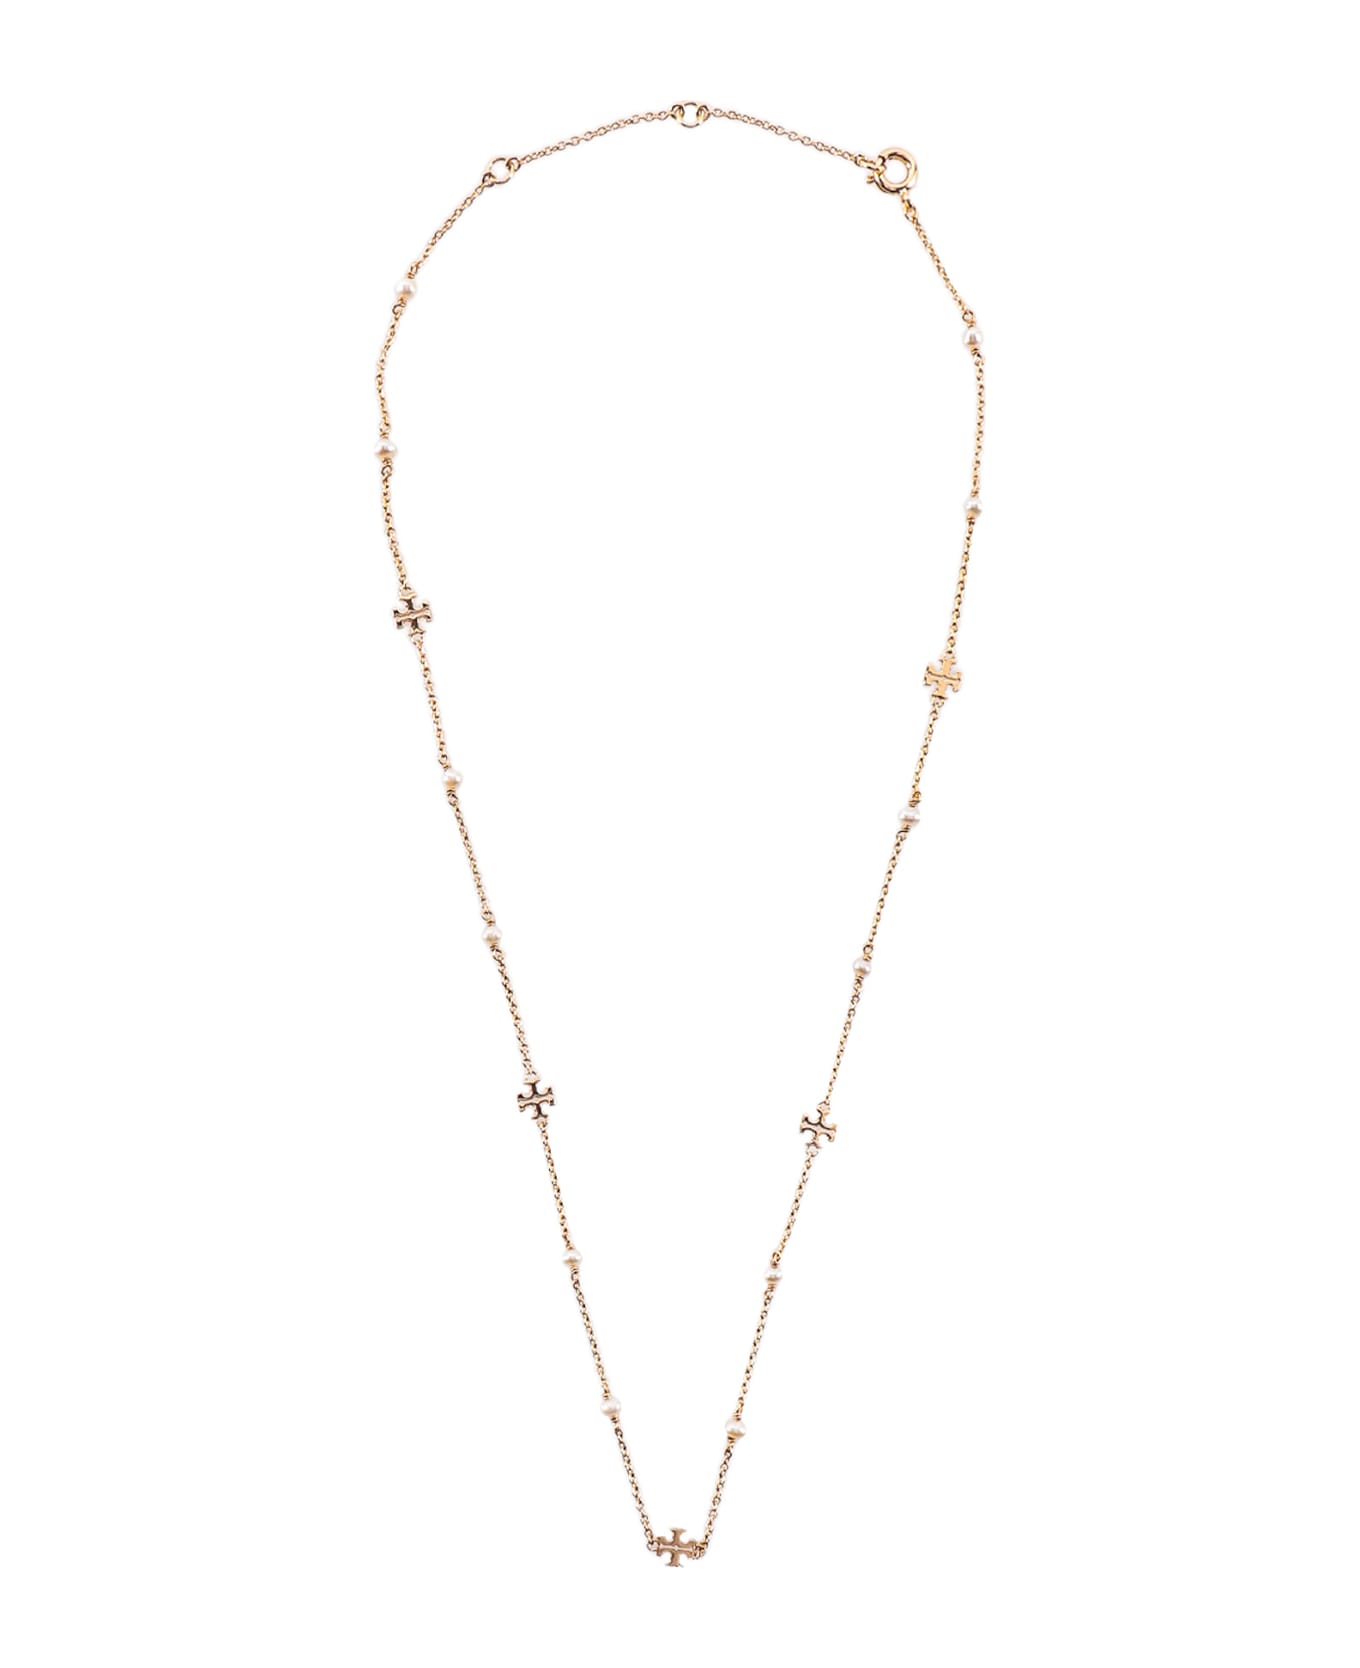 Tory Burch Necklace - Gold